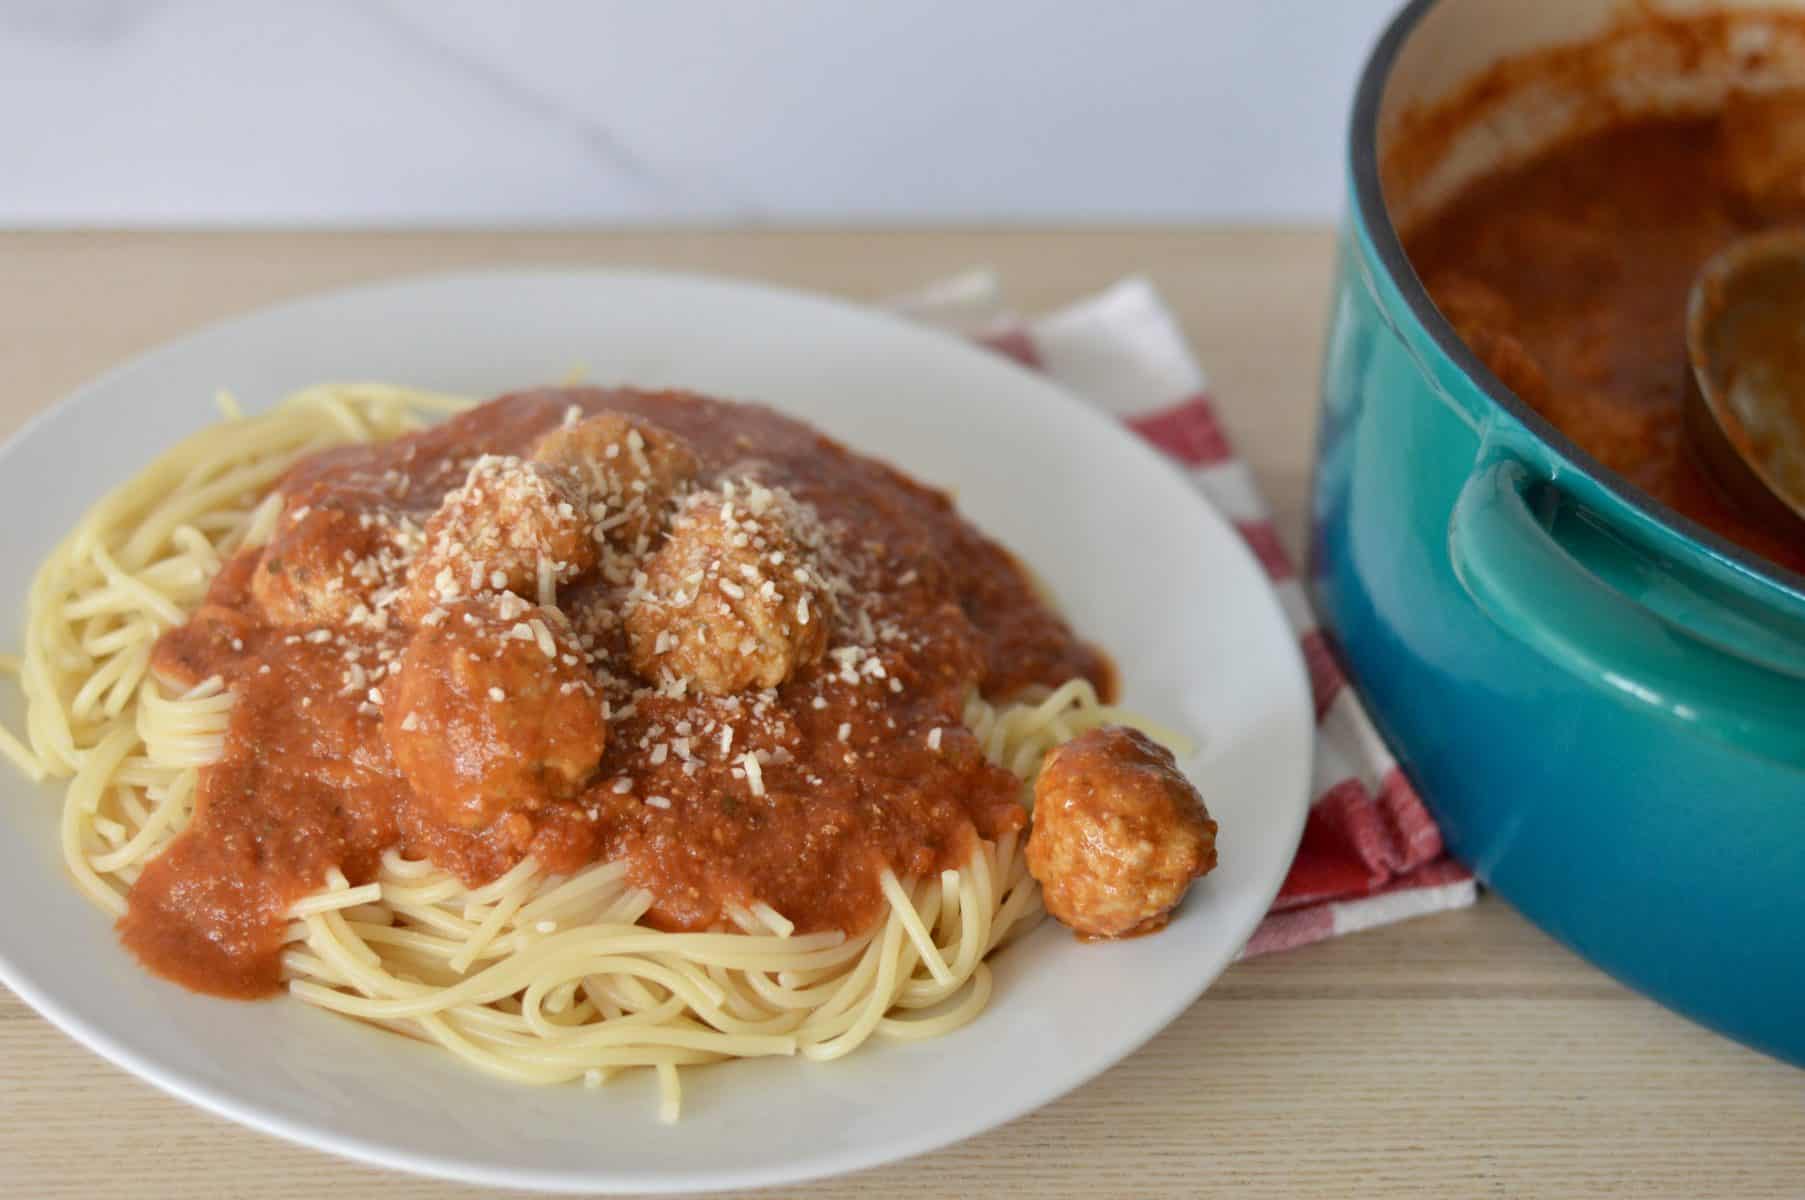 plate of spaghetti and meatballs.